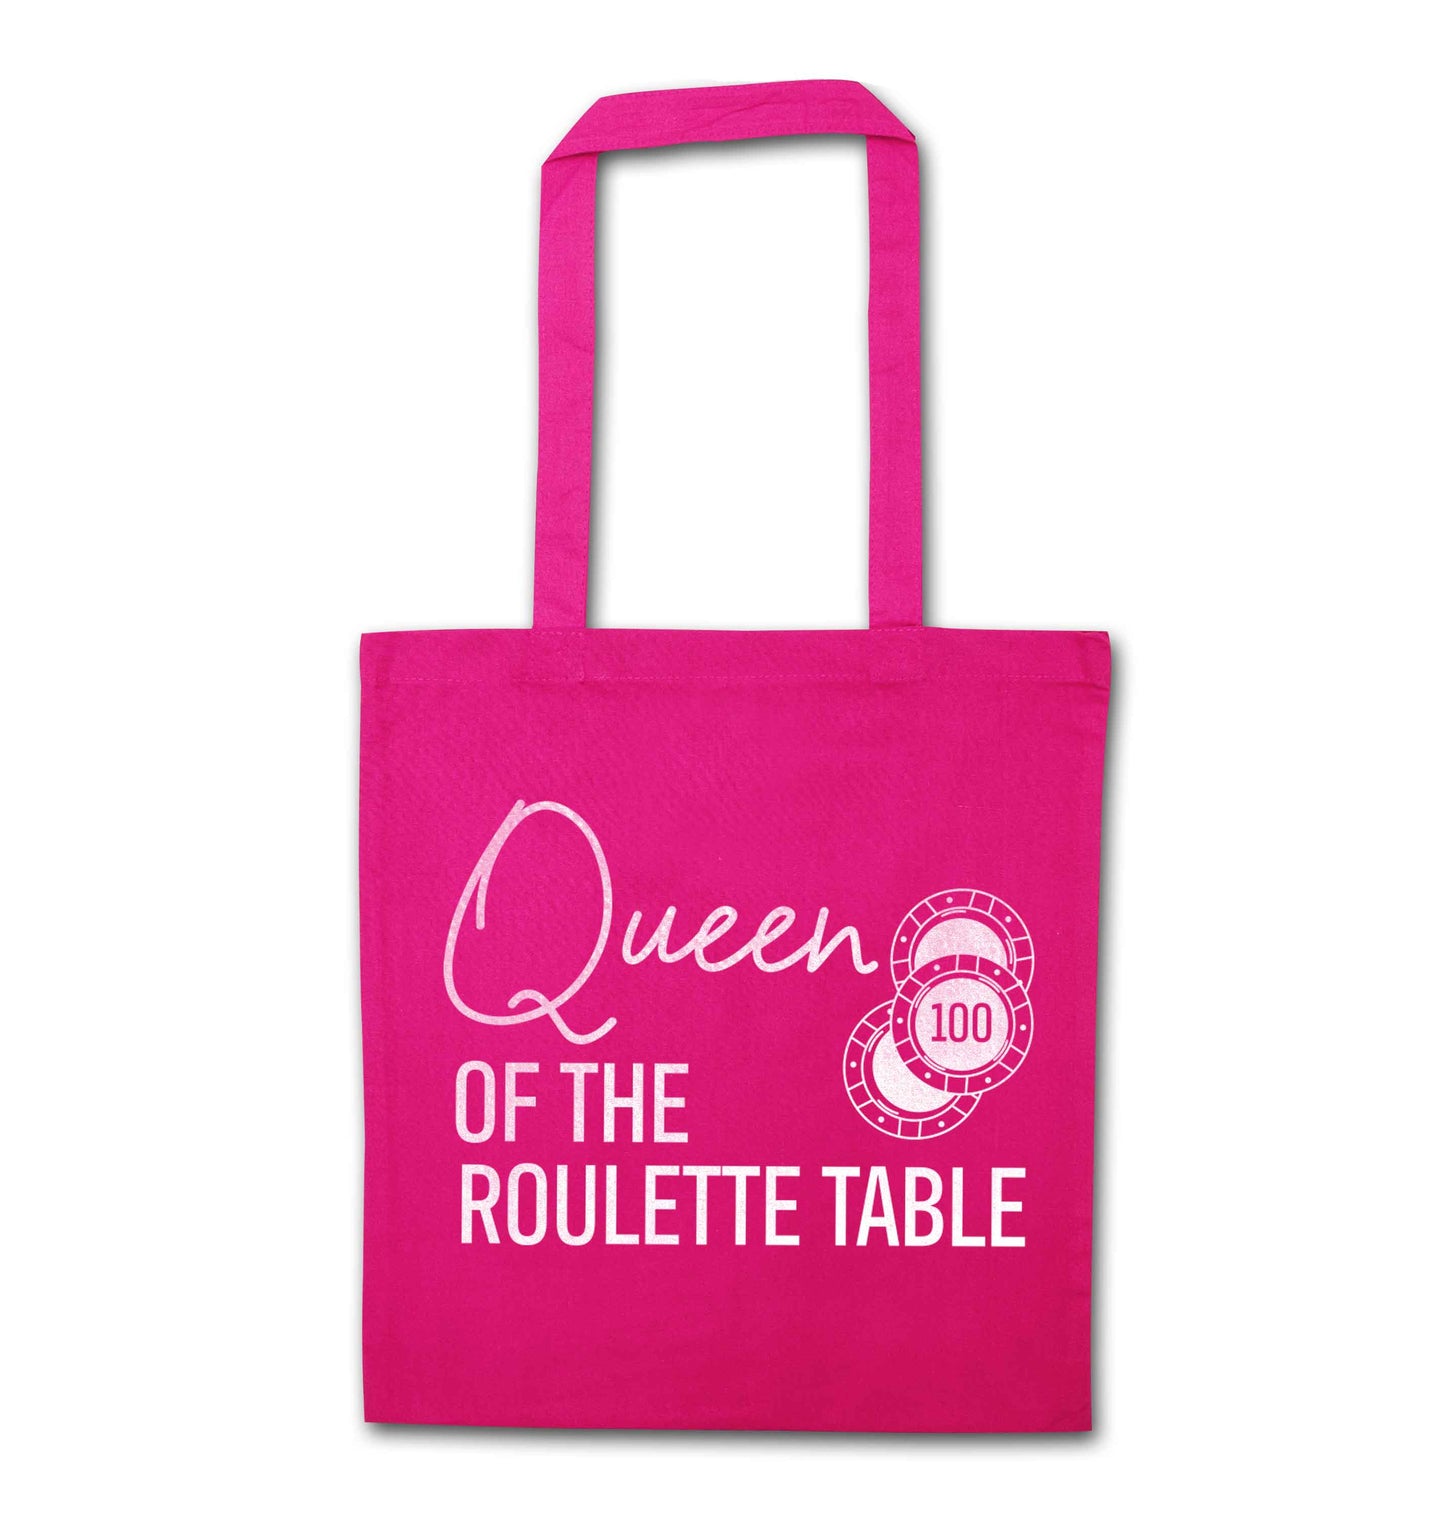 Queen of the roulette table pink tote bag